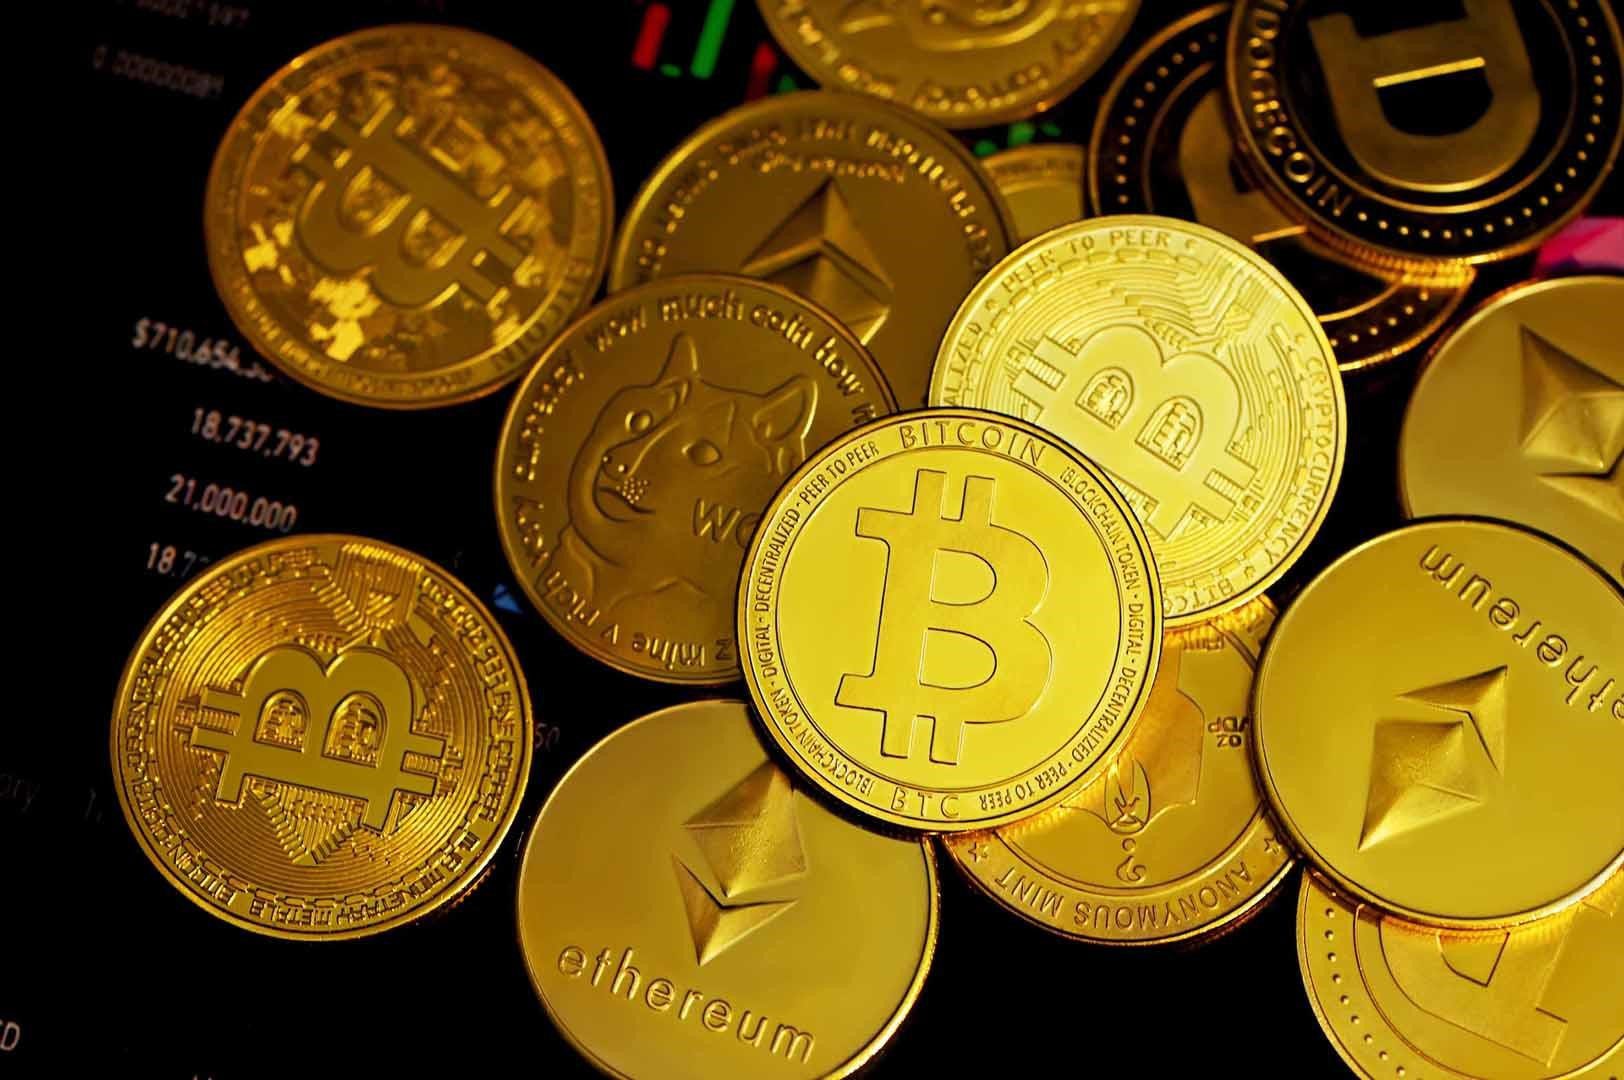 Gold coins with the Ethereum and Bitcoin logo